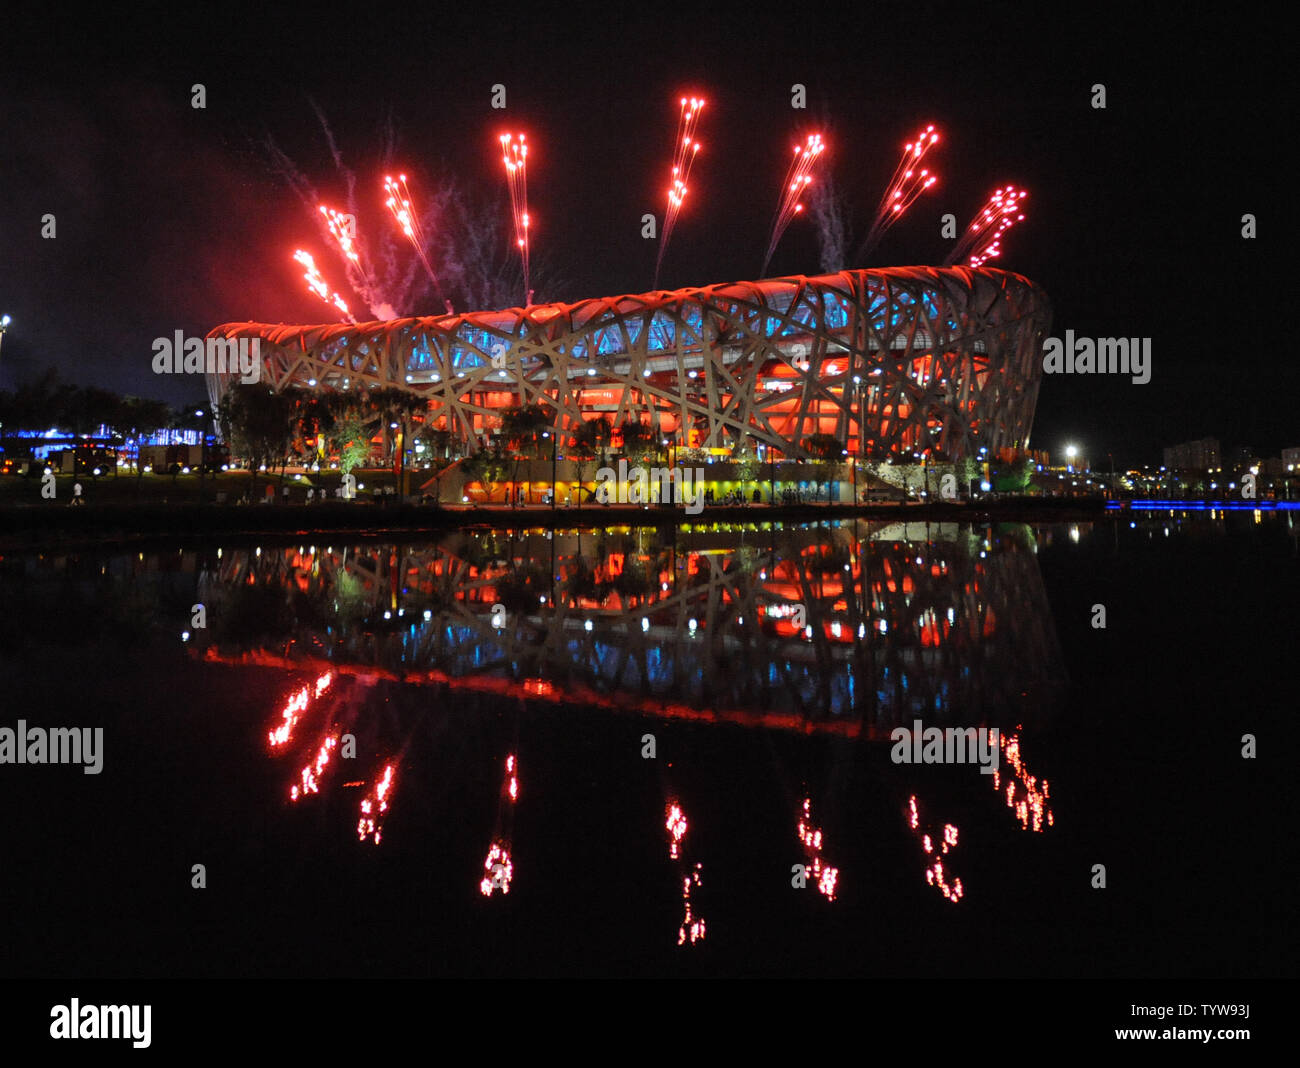 Fireworks explode over the National Stadium, called the Bird's Nest, during the dress rehearsal for the 2008 Olympics in Beijing on August 2, 2008.  The official opening ceremony for the Summer Games is August 8, 2008.   (UPI Photo/Pat Benic) Stock Photo